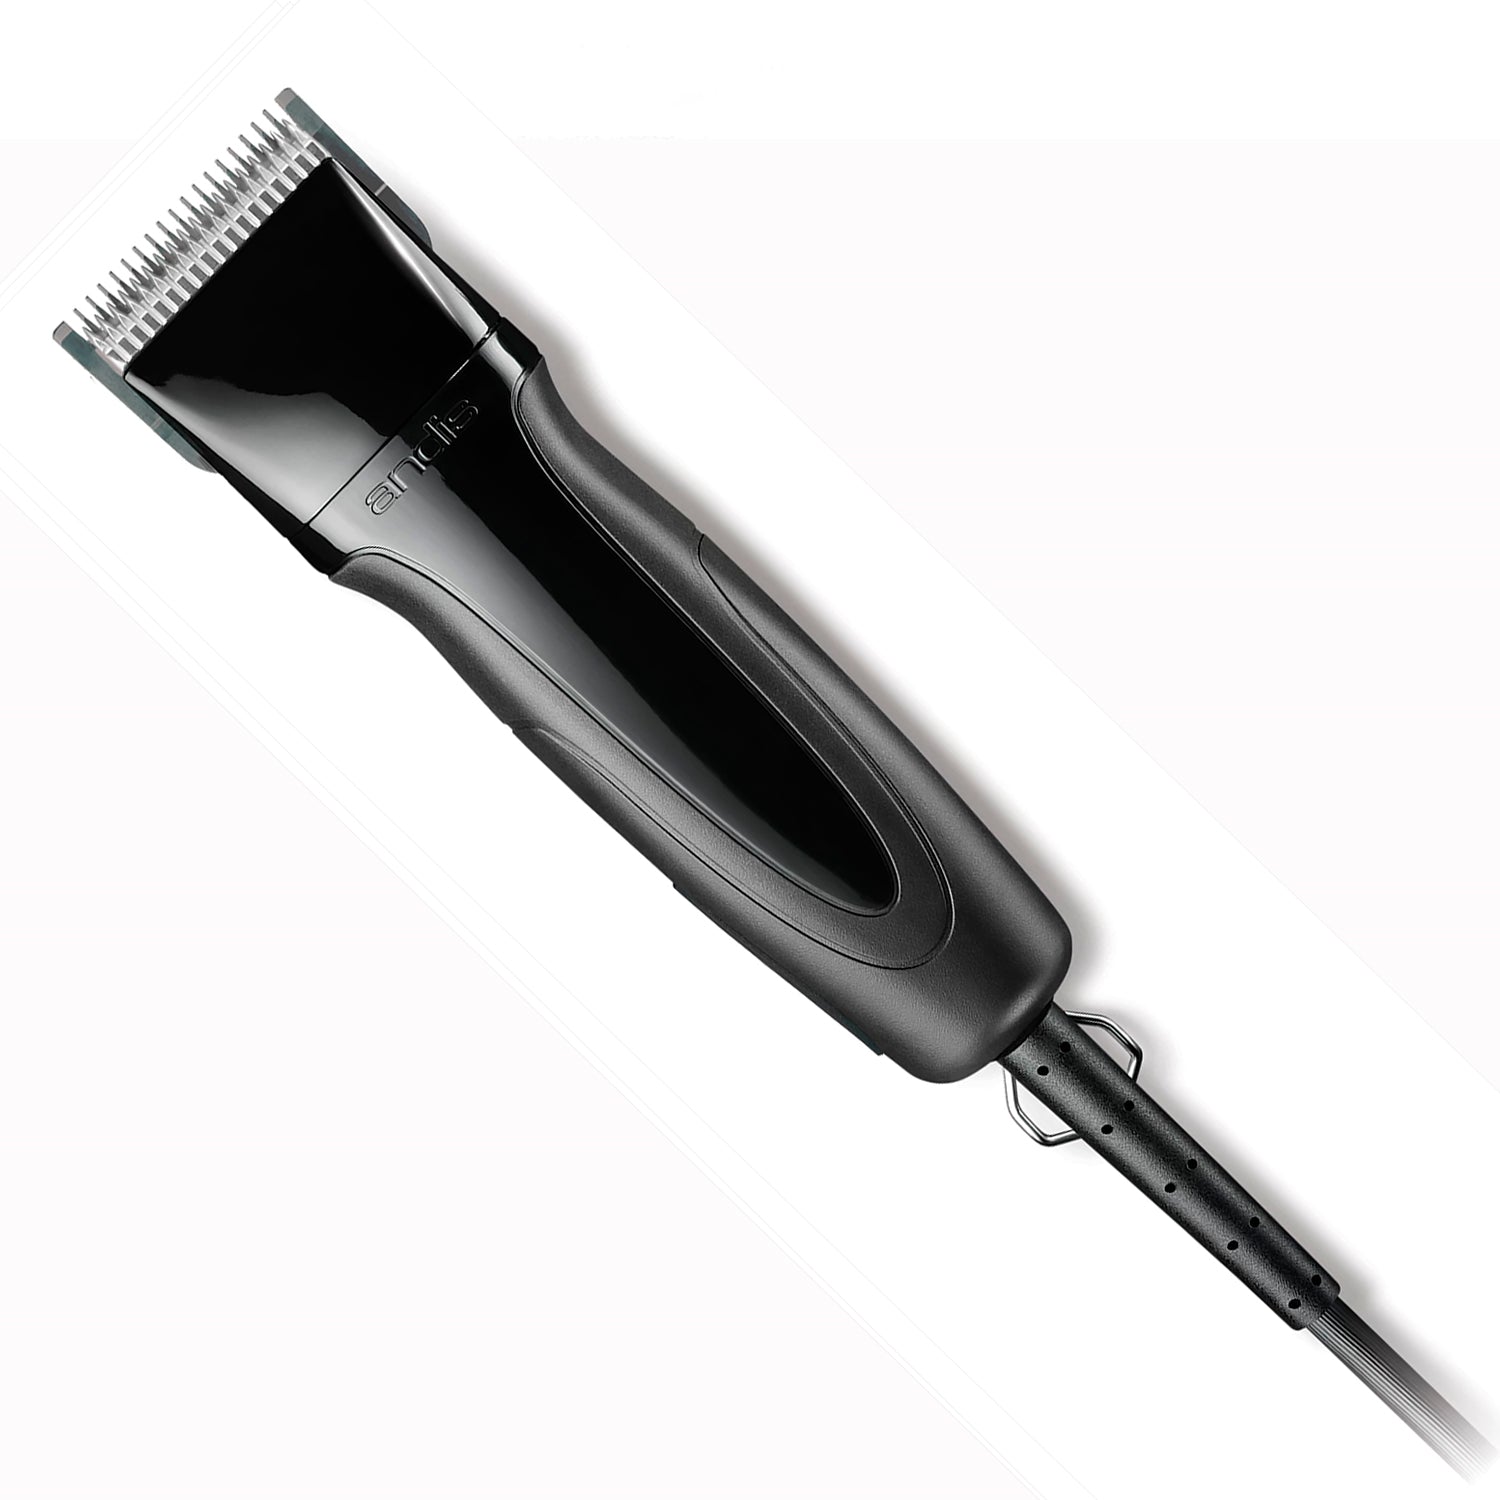 andis clippers black friday